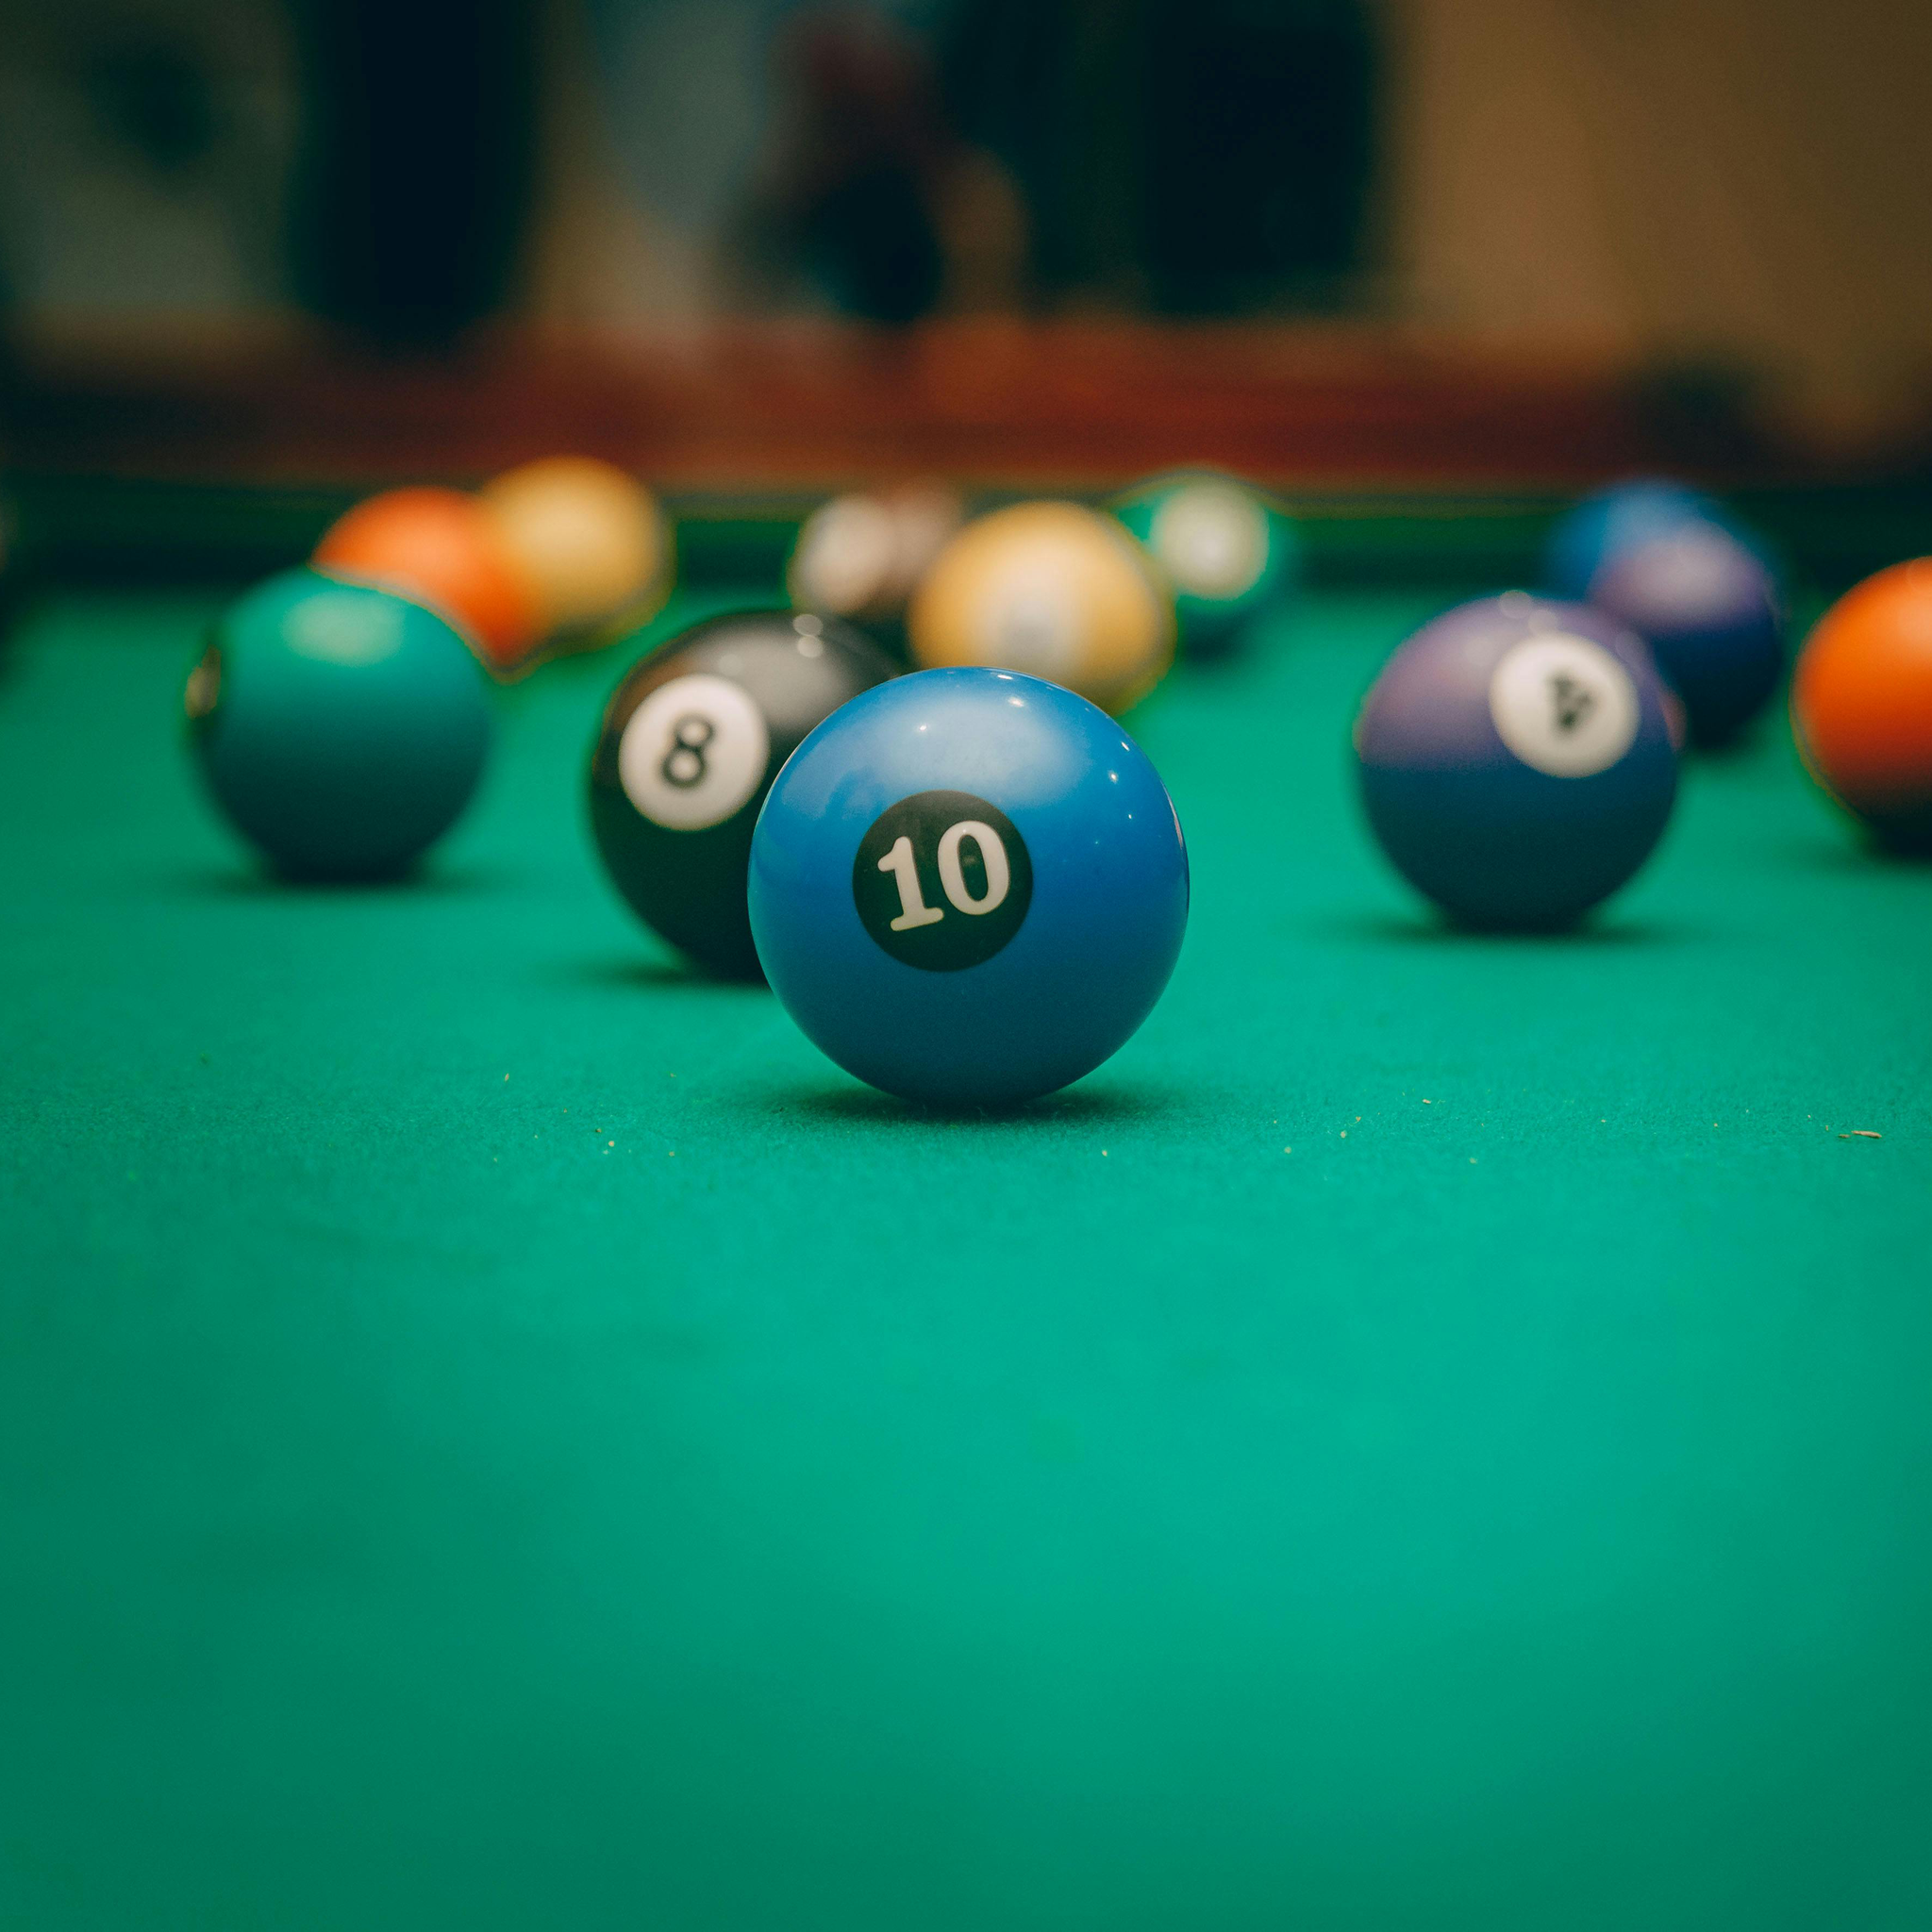 The Top 5 Pool Games to Play at Home: Rules and Setup Guide